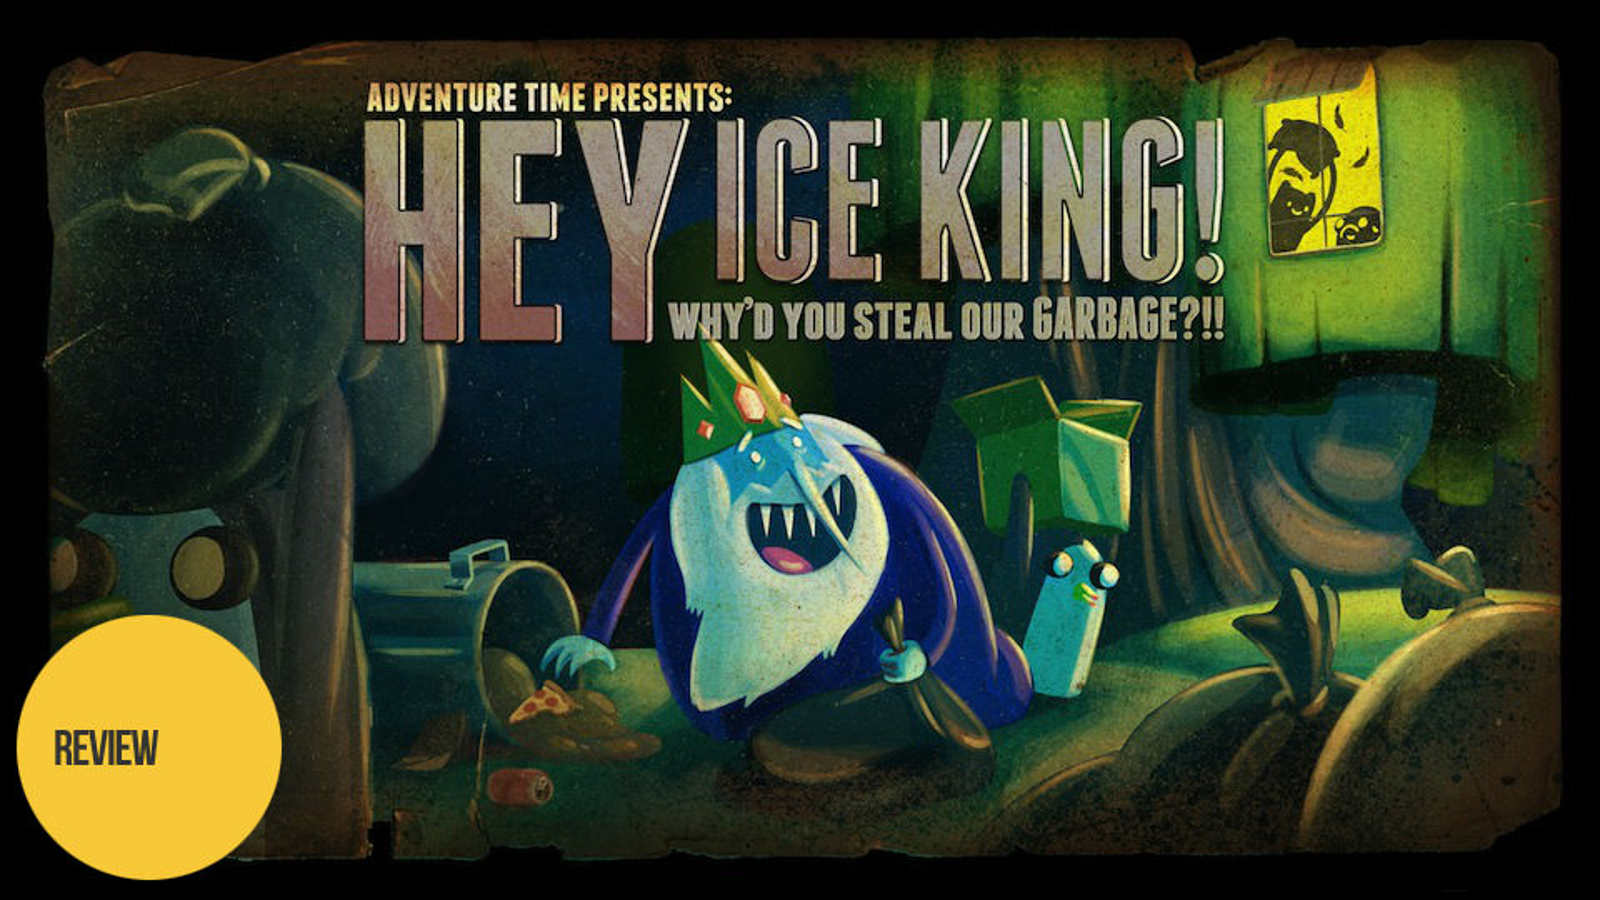 download adventure time hey ice king why d you steal our garbage for free